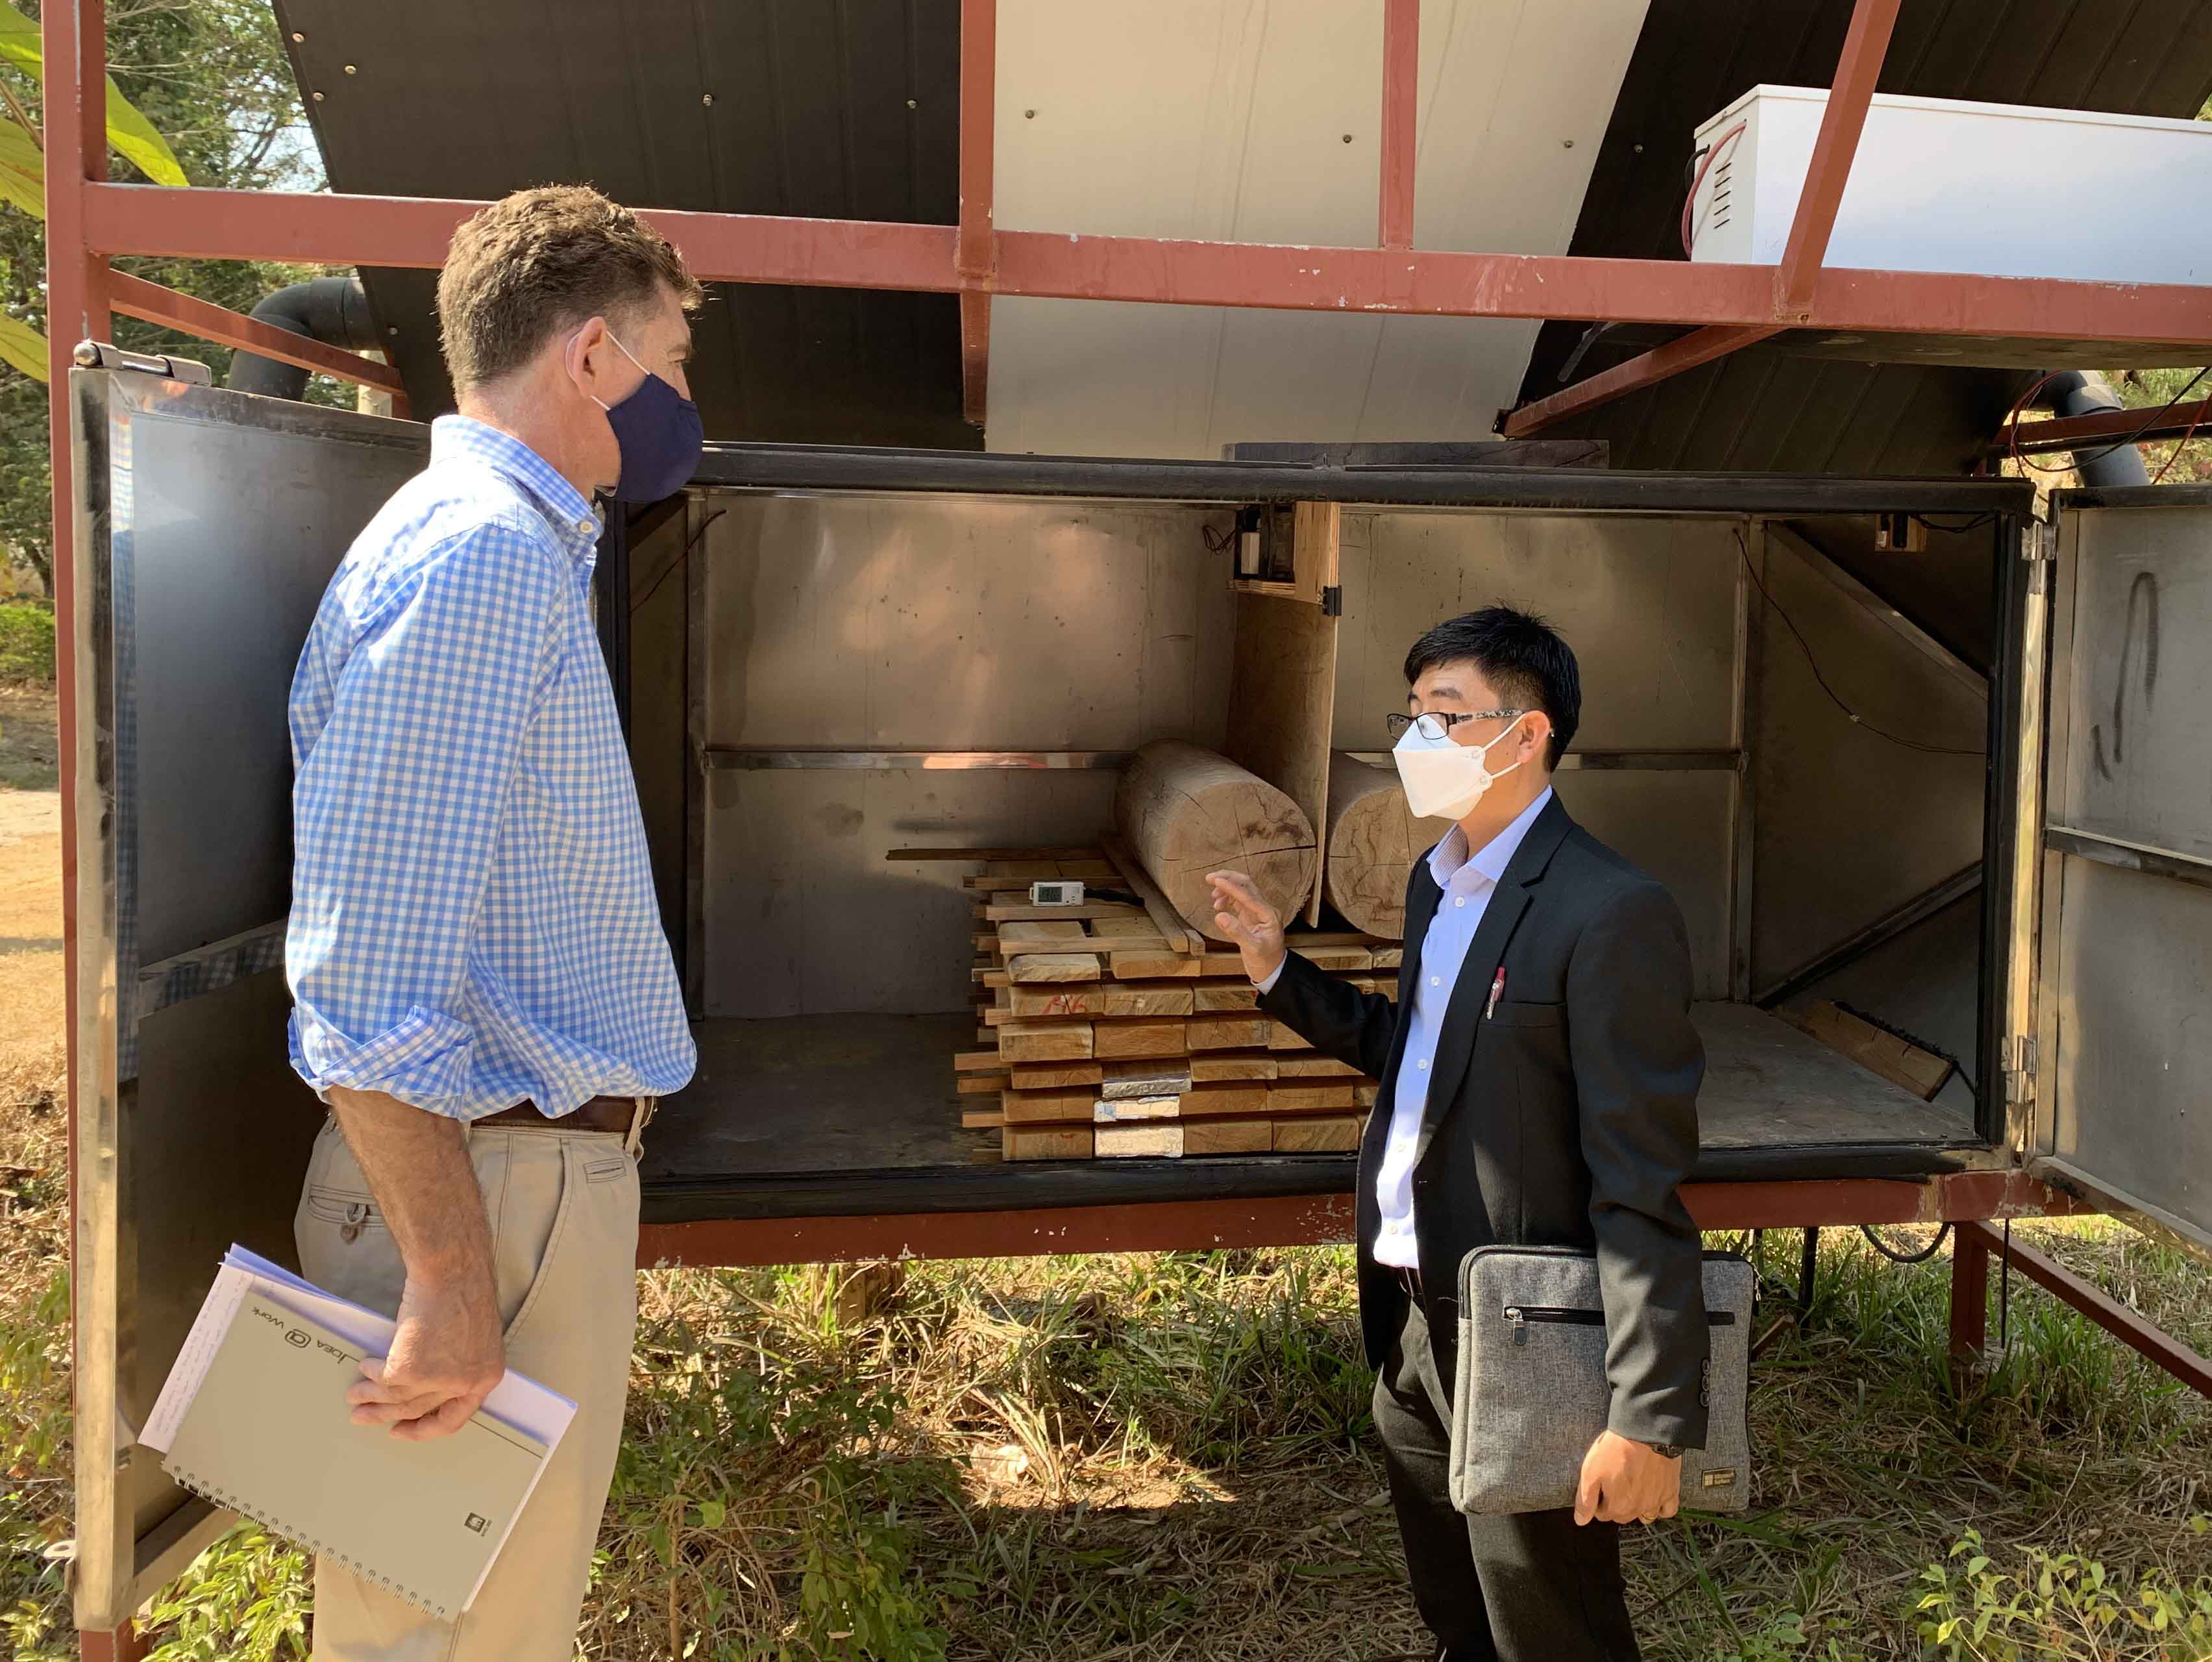 Deputy Head of Mission at the Australian Embassy in Lao PDR, Dan Heldon (left) with ACIAR Alumni, Dr Khamtan Phonetip (right) inspecting a solar kiln during a recent visit.